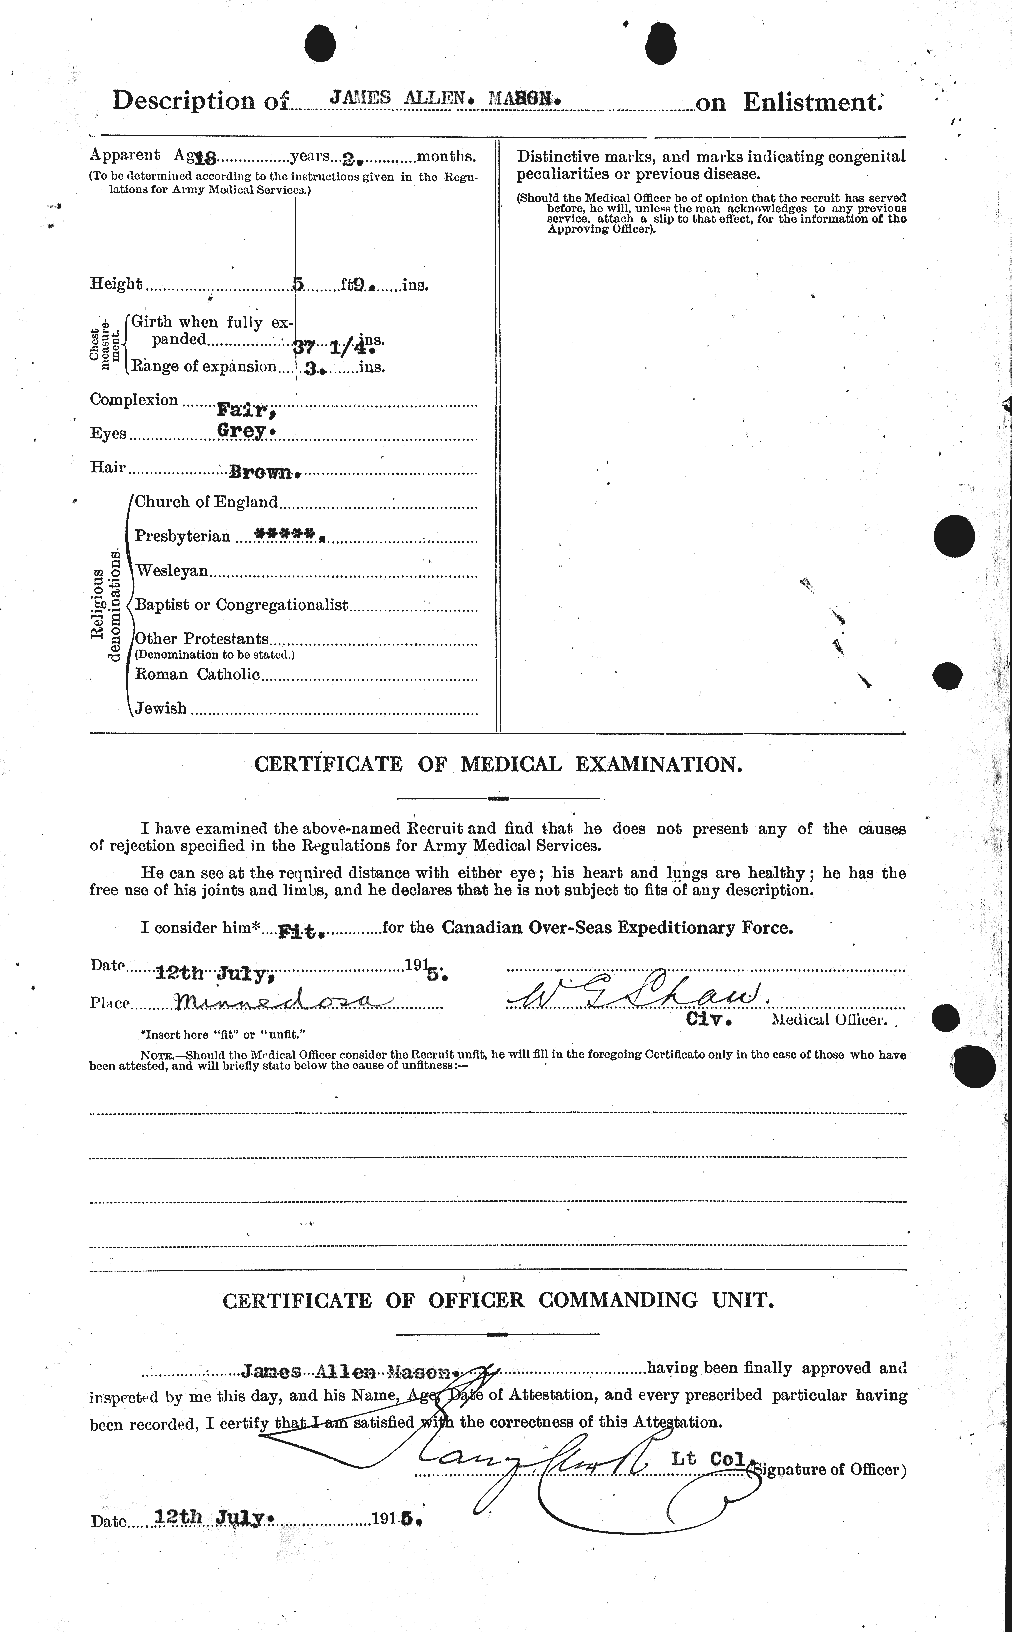 Personnel Records of the First World War - CEF 484640b